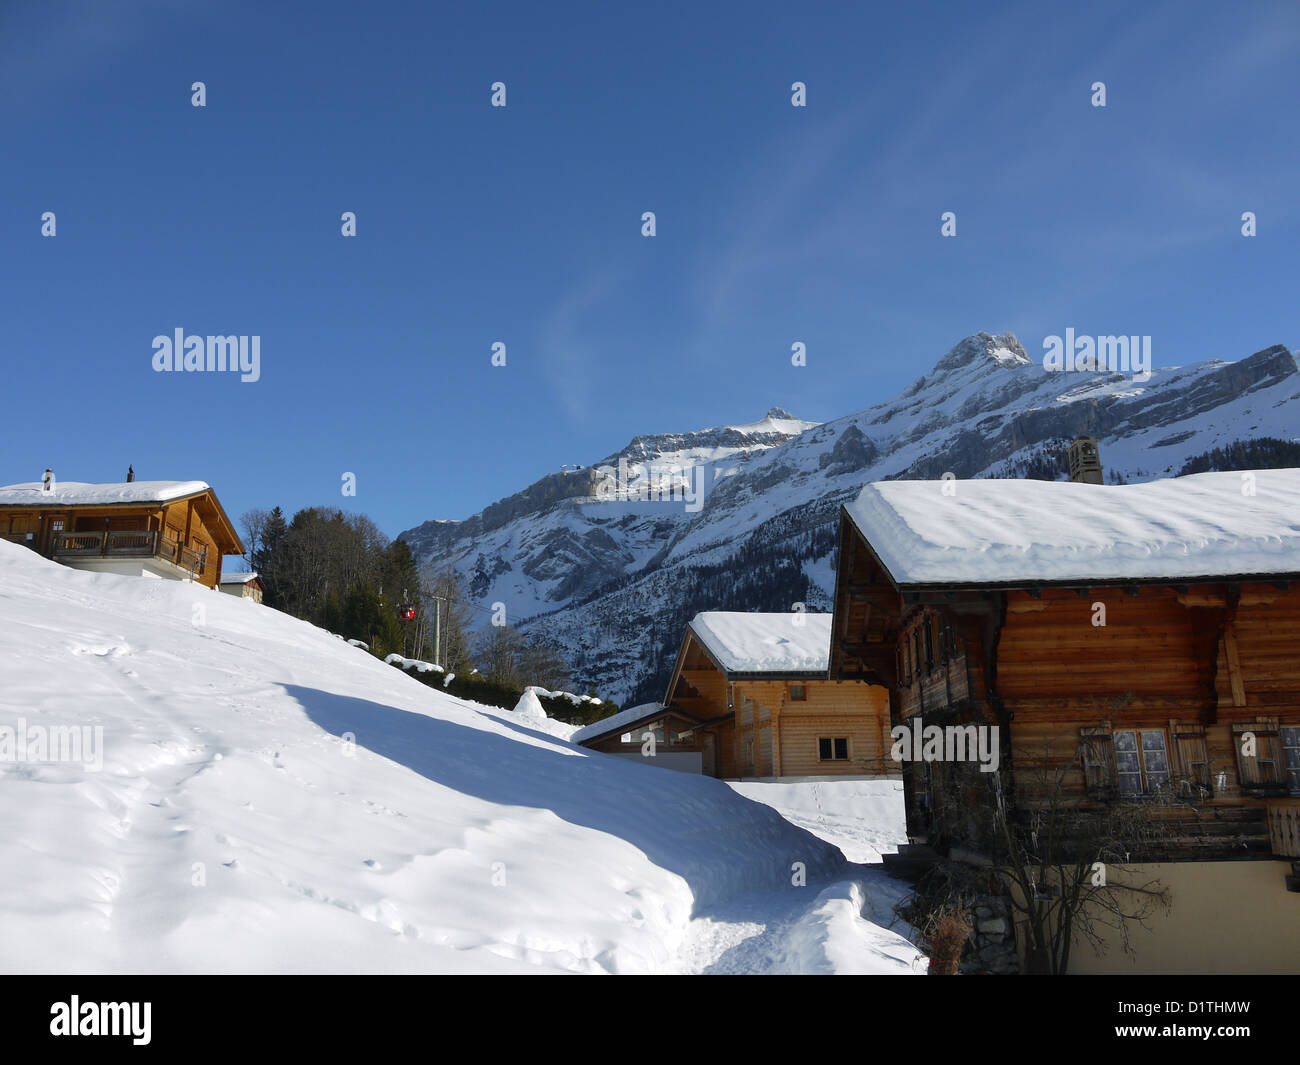 Wooden chalets old and new in the ski resort of Les Diablerets, Switzerland. Stock Photo